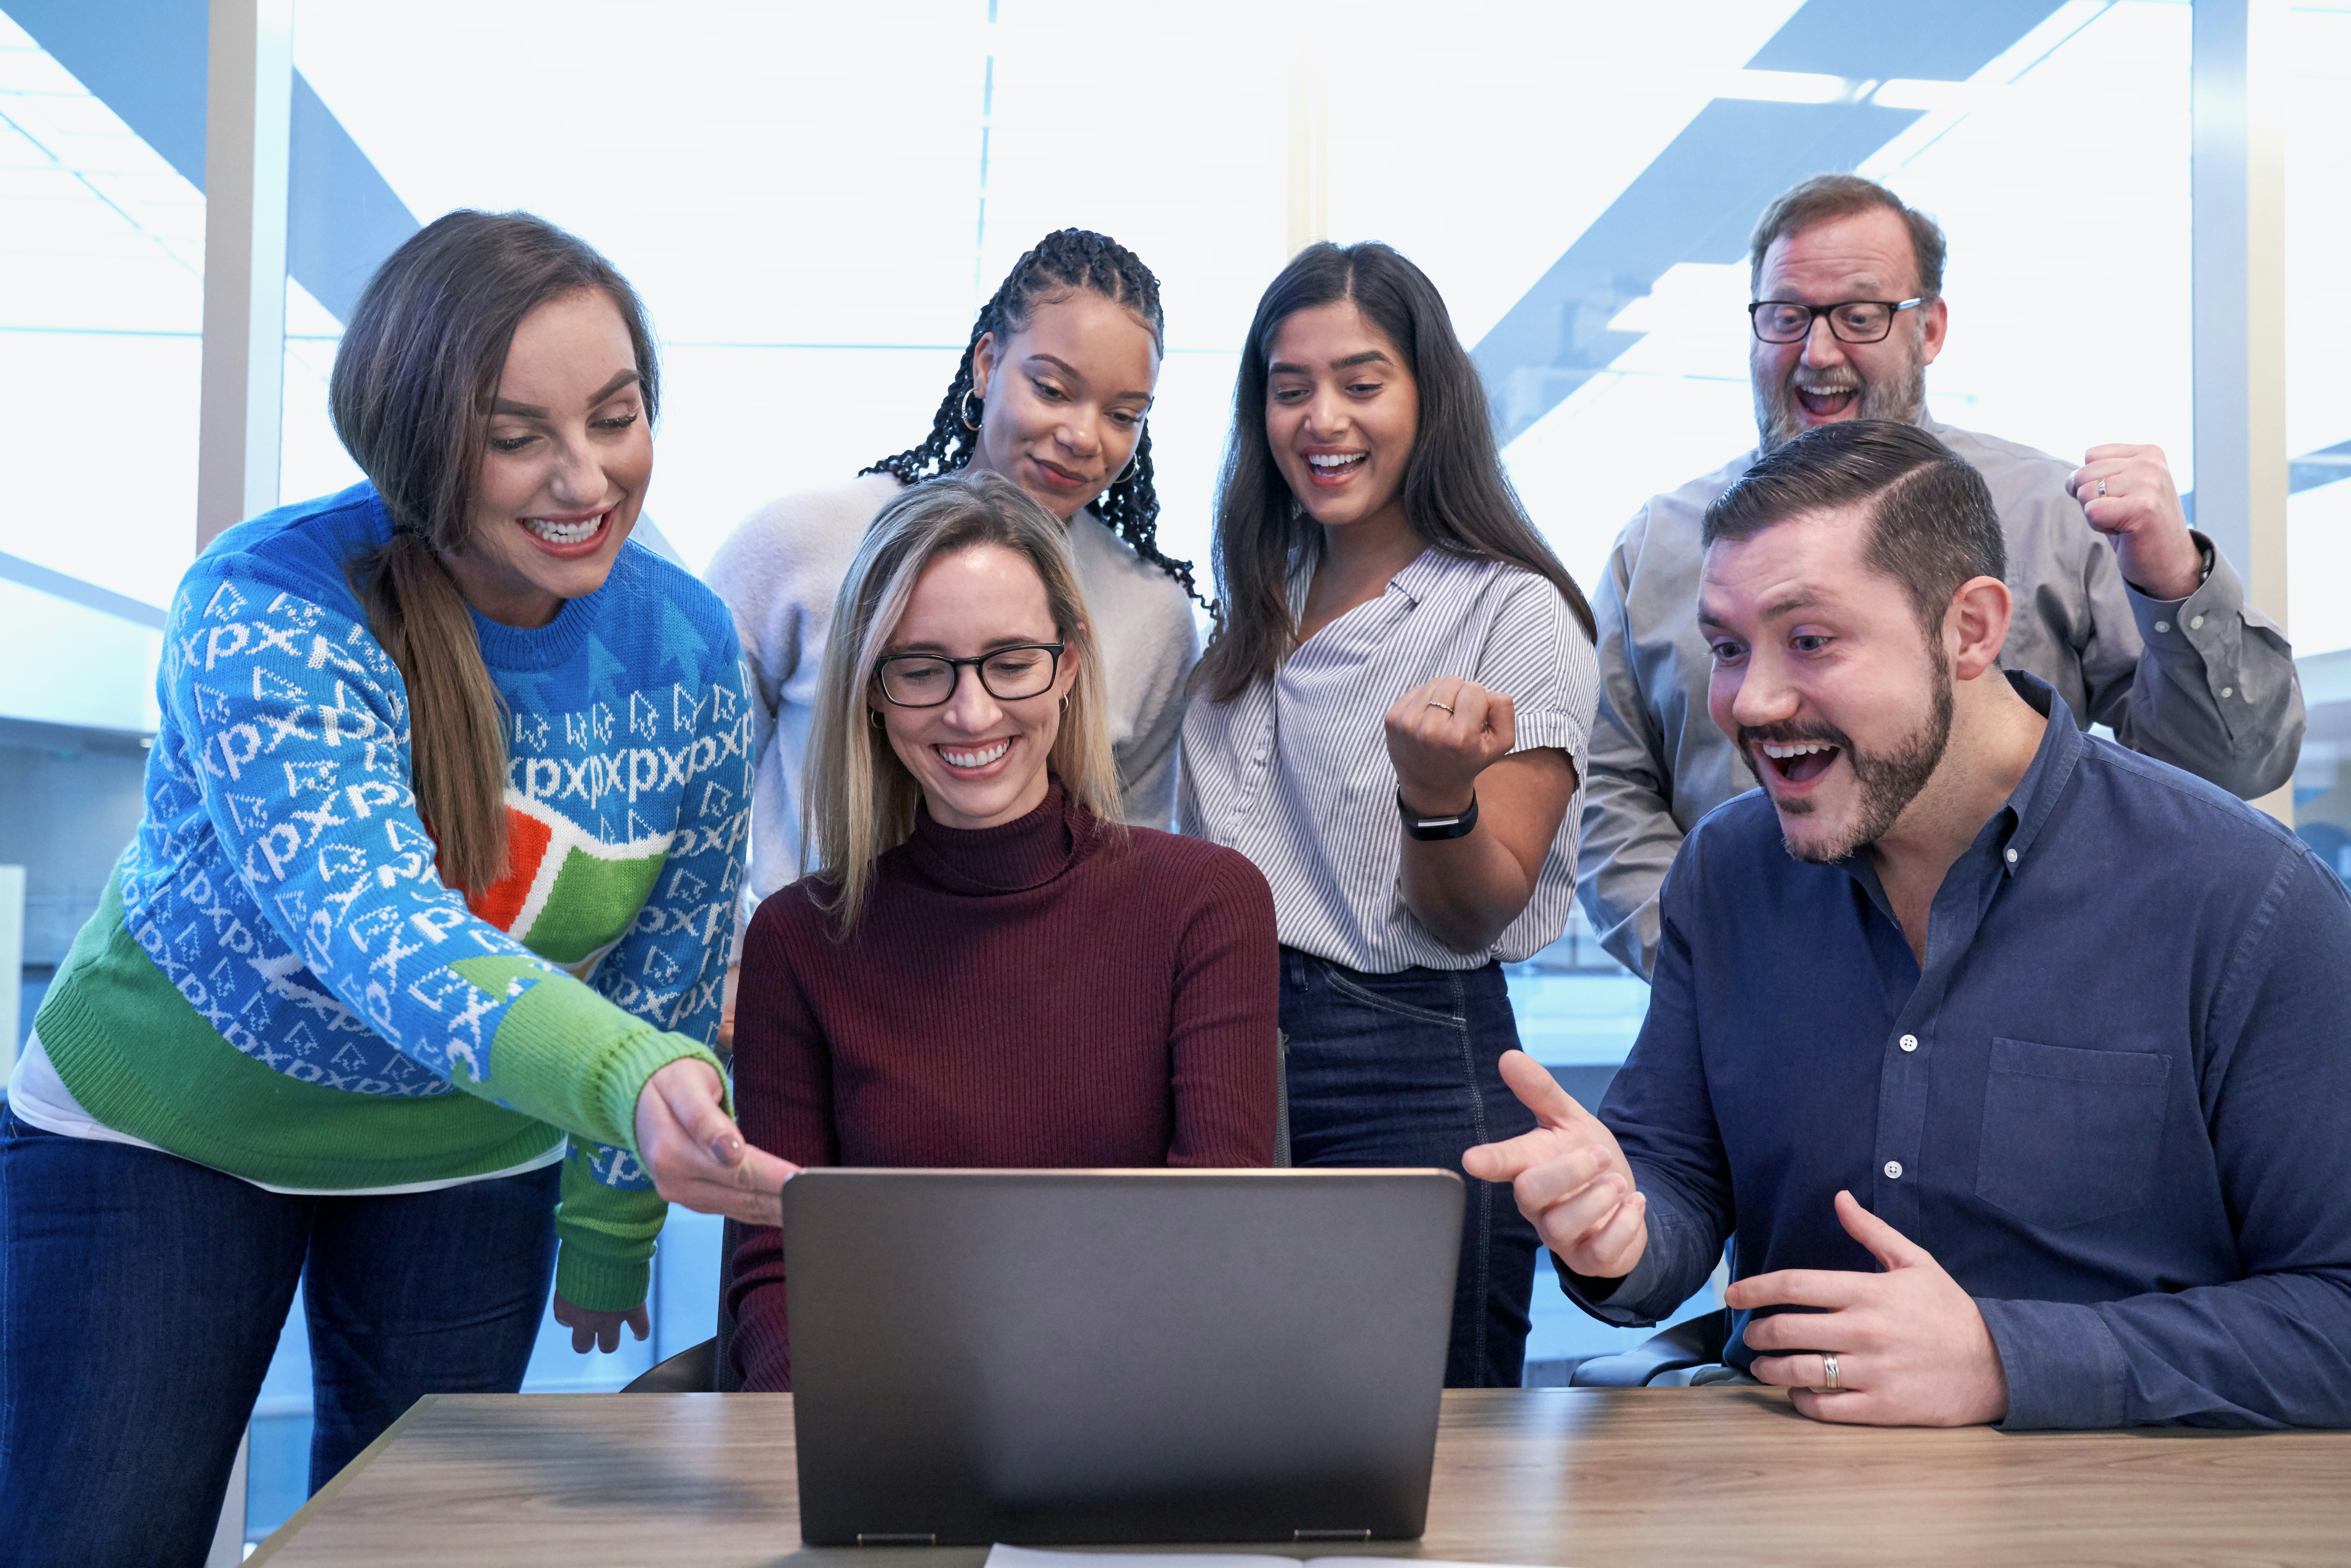 great photo recipe,how to photograph festive holiday office party in #windowsuglysweater softwear by @windows  ; men and women sitting and standing while staring at laptop